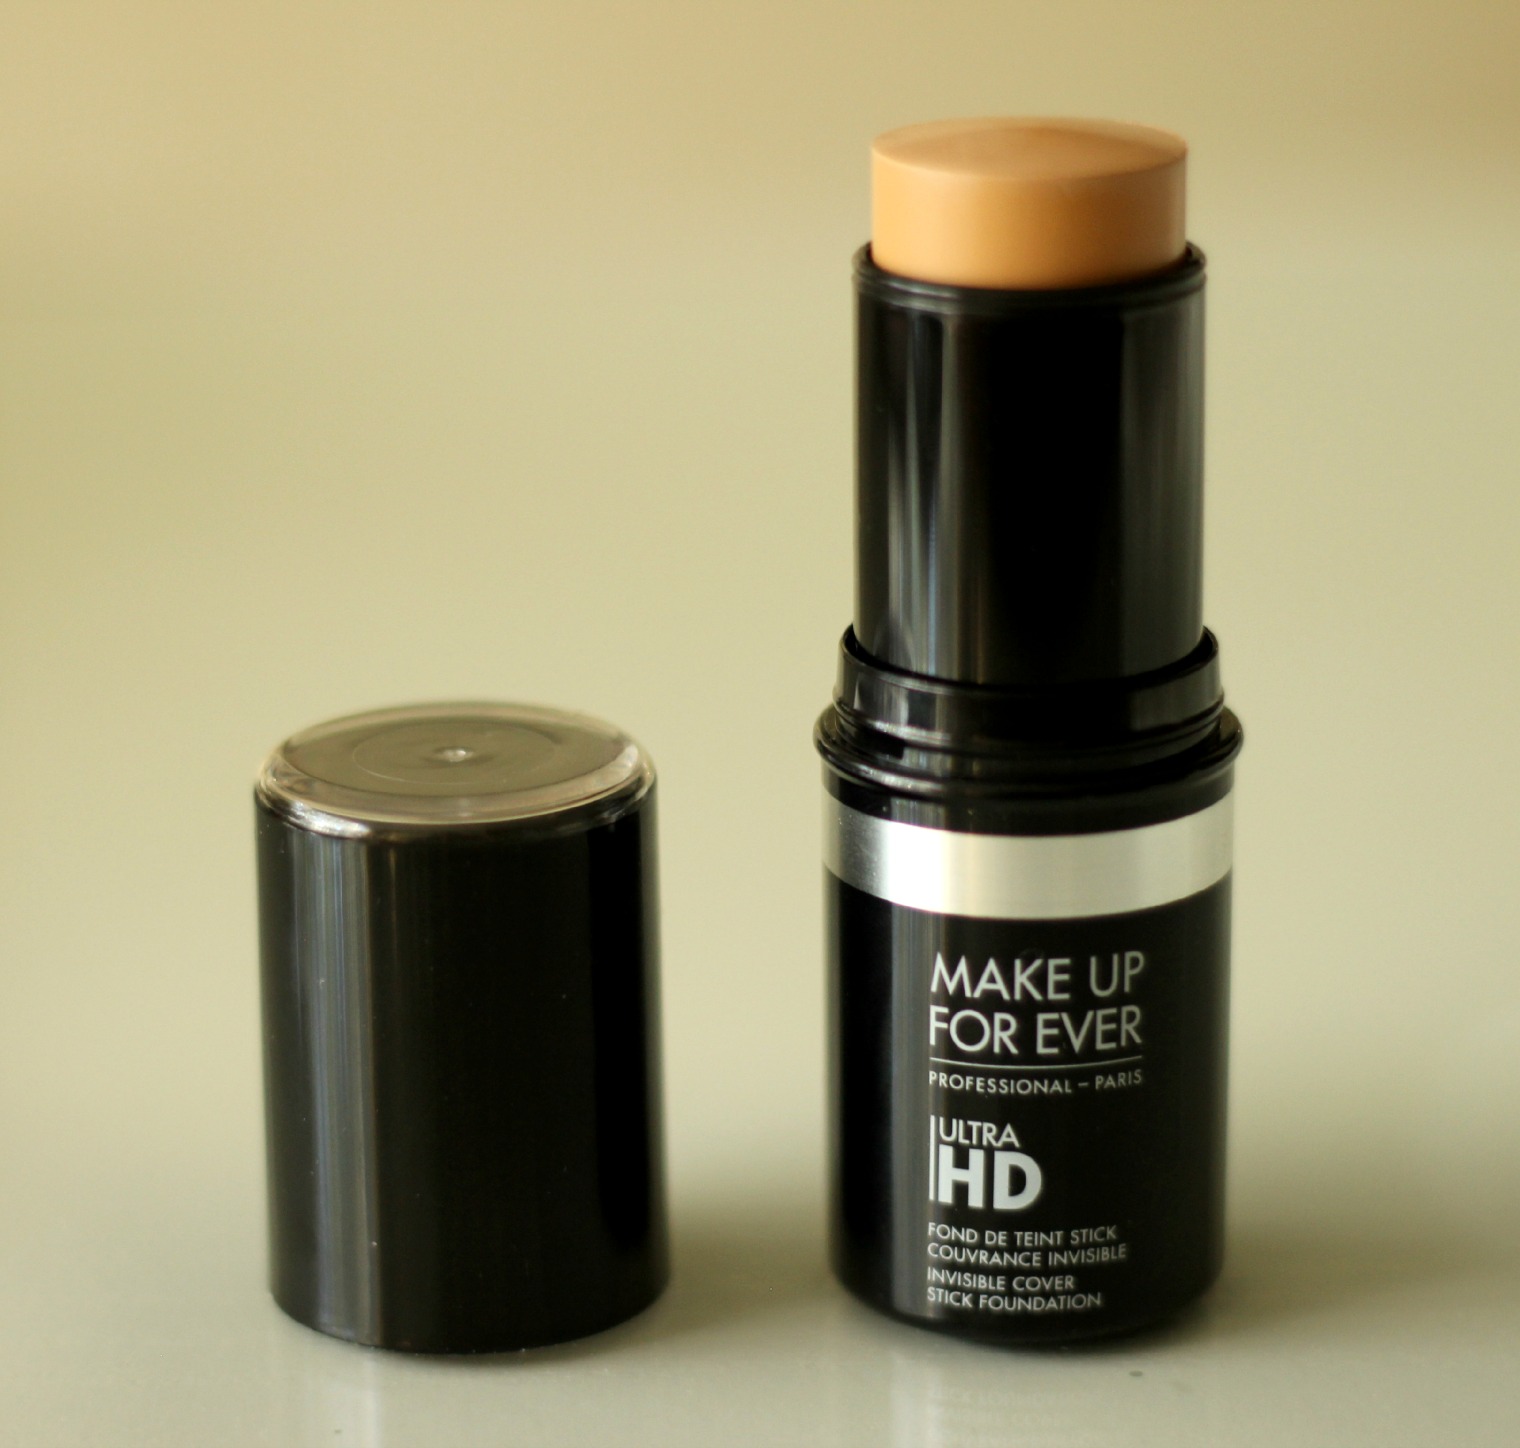  MAKE UP FOR EVER ULTRA HD INVISIBLE COVER STICK FOUNDATION SWATCHES